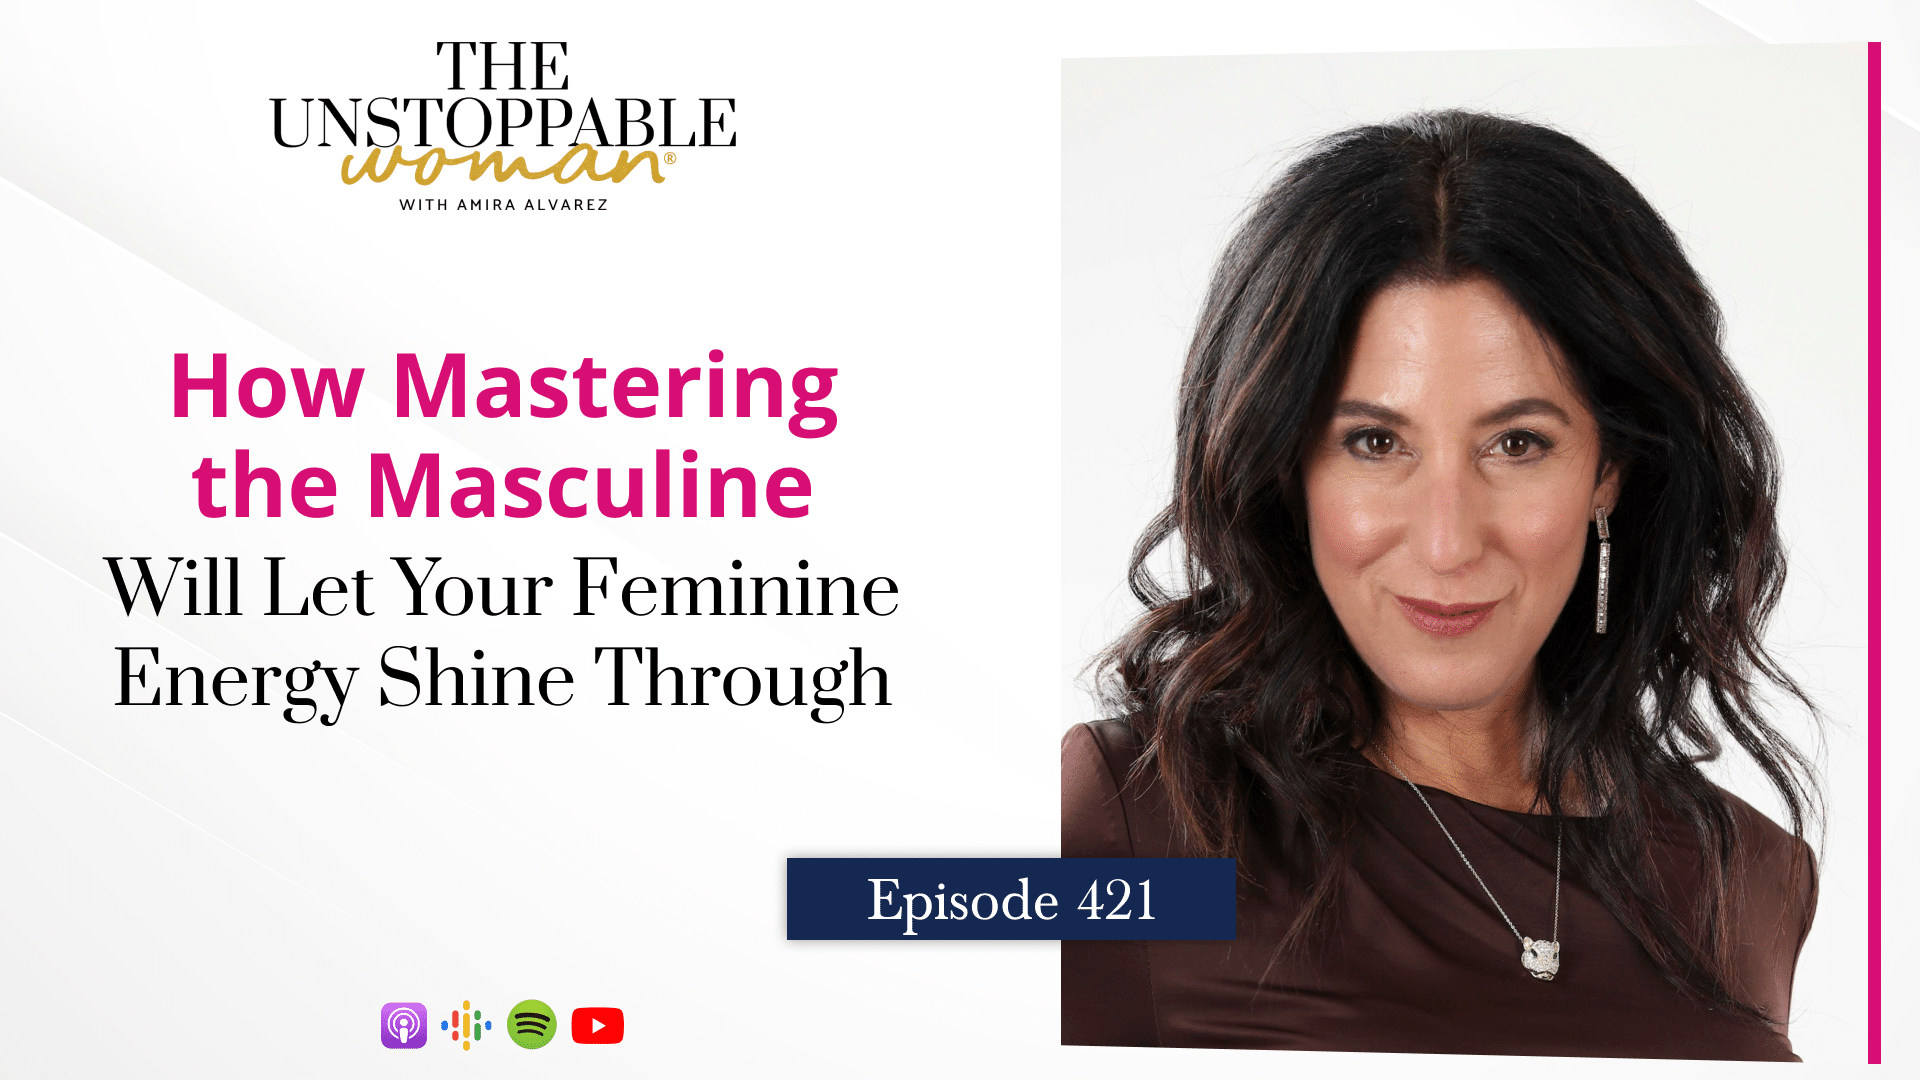 [Image: How Mastering the Masculine Will Let Your Feminine Energy Shine Through]